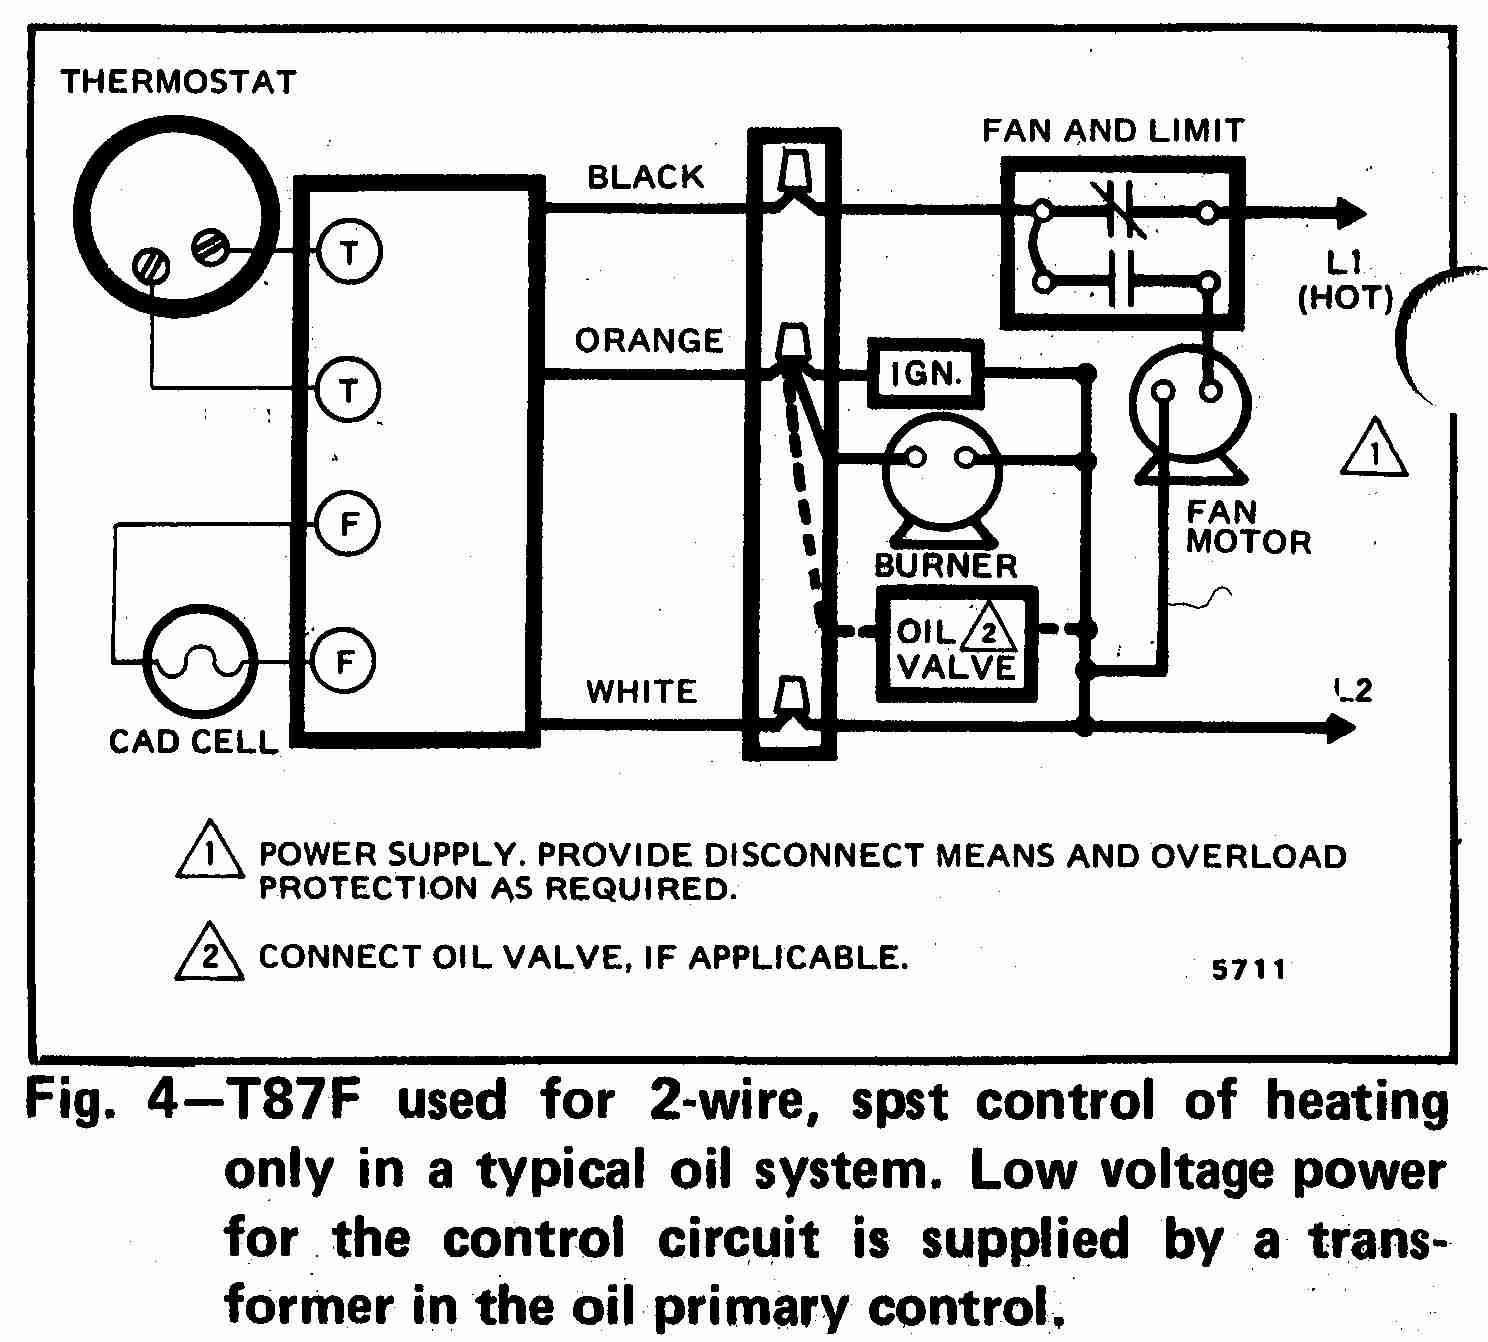 Room Thermostat Wiring Diagrams For Hvac Systems - Wiring Diagram For Honeywell Thermostats